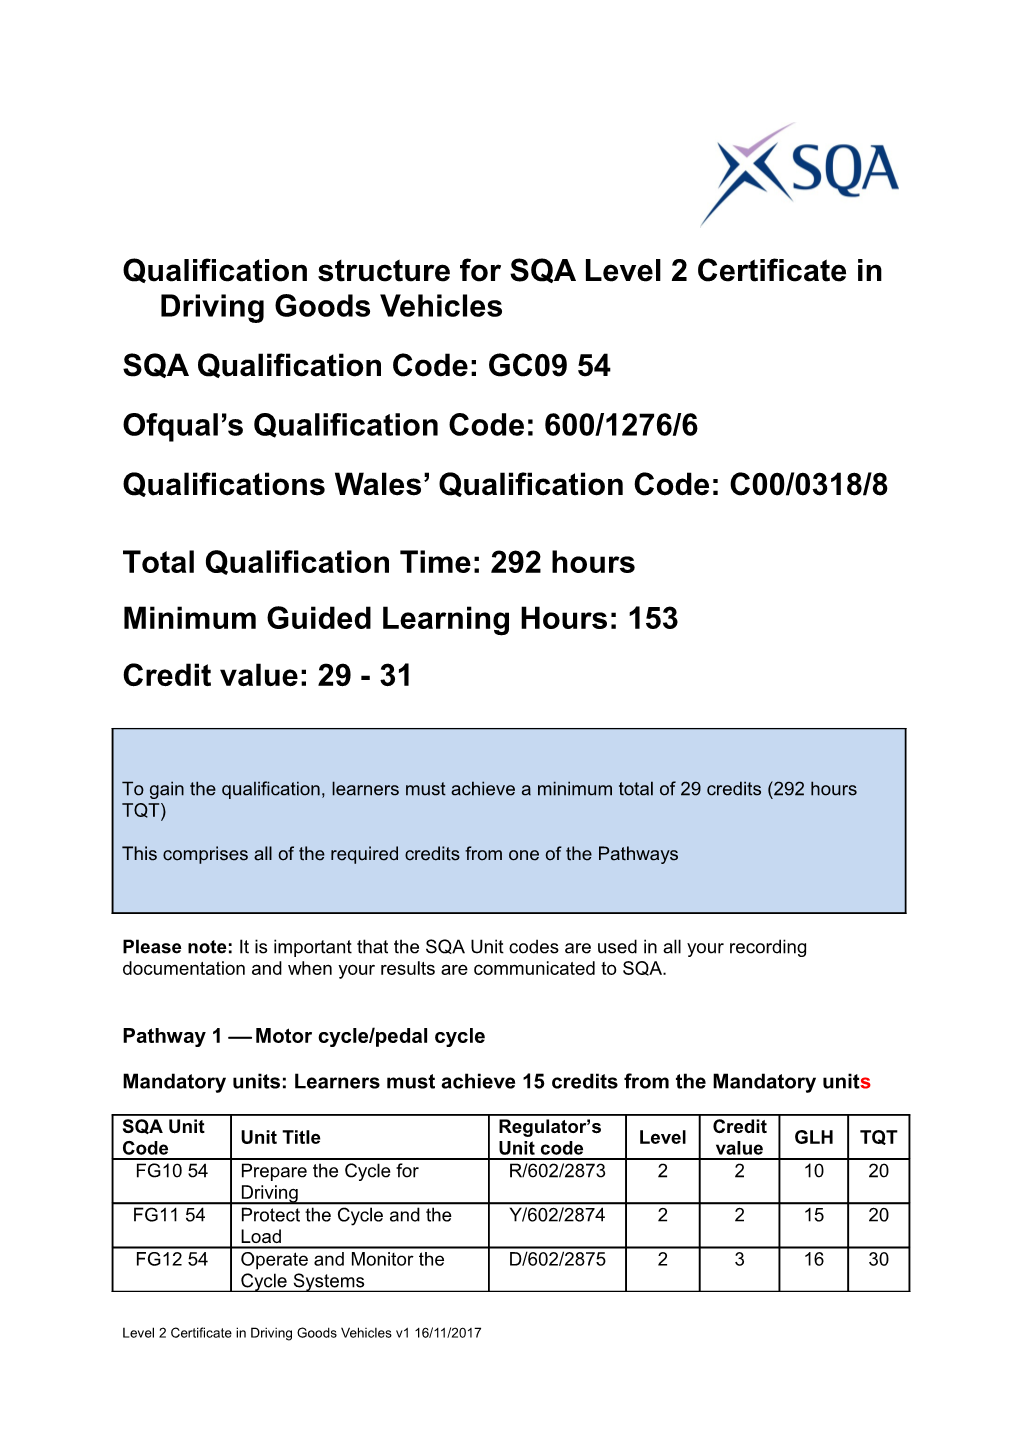 Qualification Structure for SQA Level 2 Certificateindriving Goods Vehicles